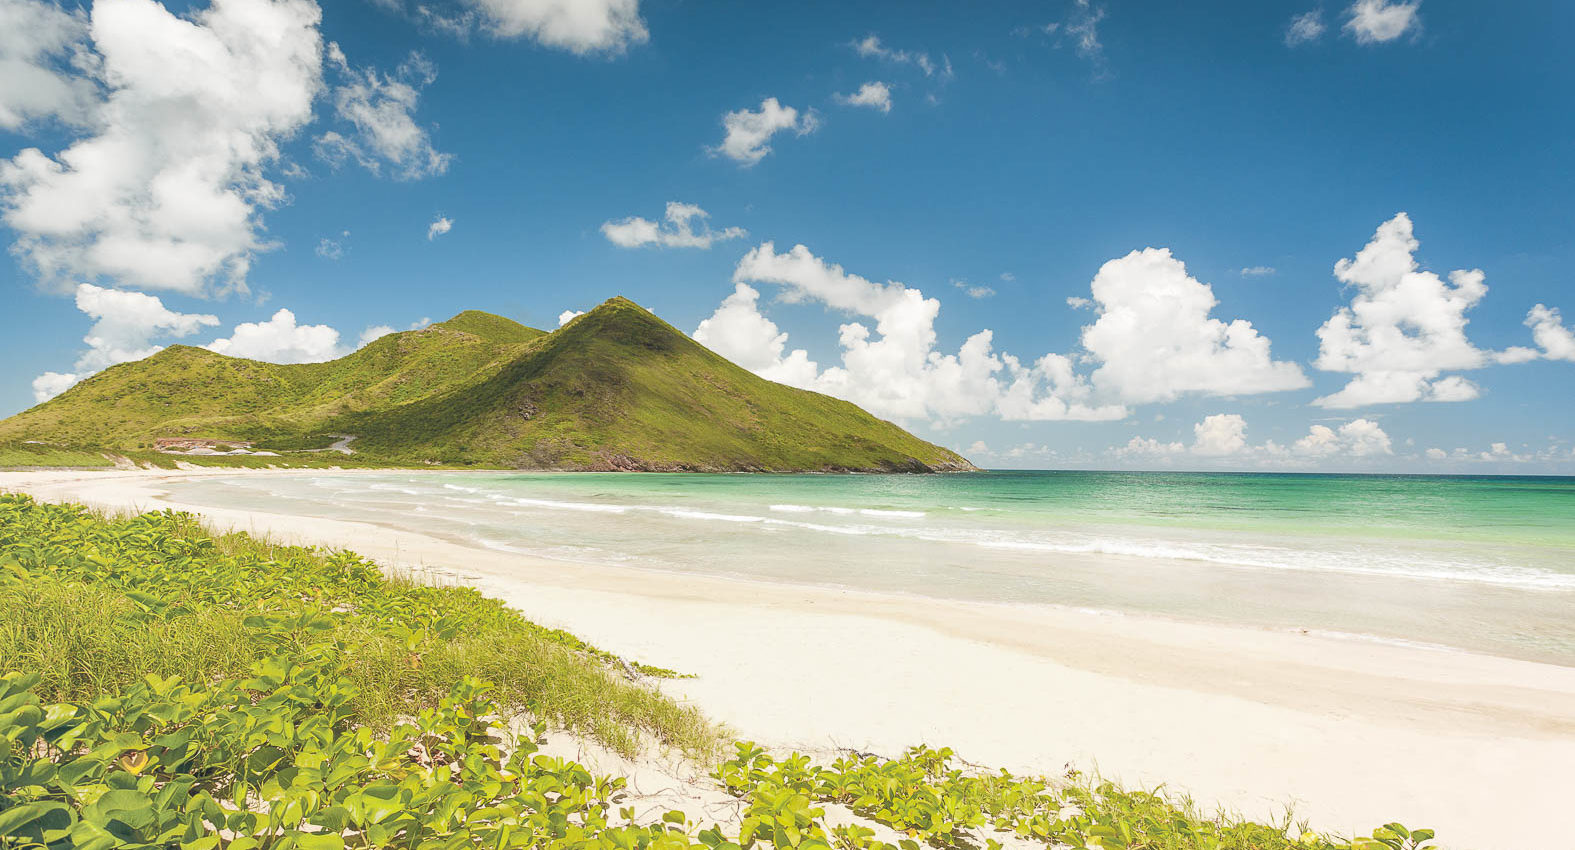 Deal Alert: Fly To St. Kitts and Nevis For Less Than $500 Round-Trip